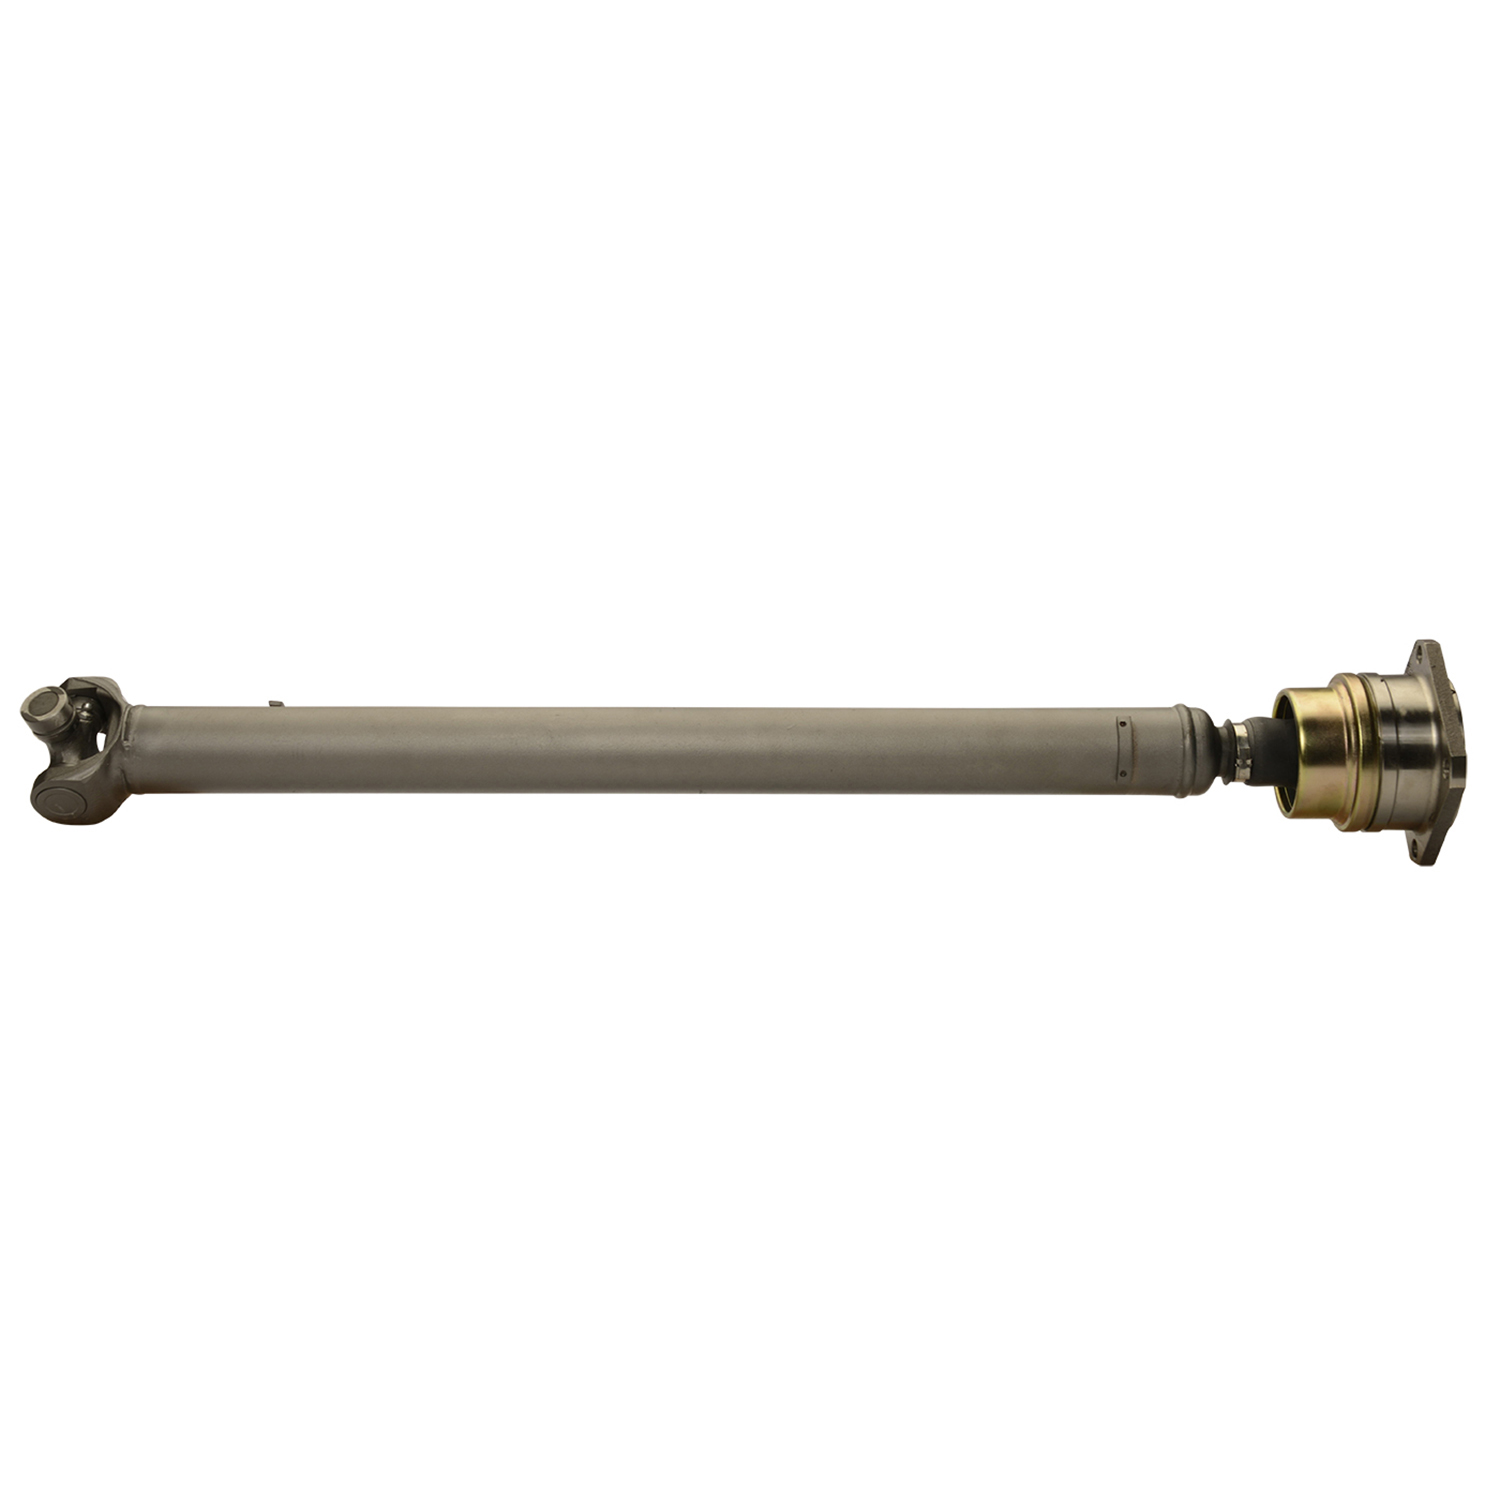 USA Standard ZDS9492 Front Driveshaft, For Hummer H3, 23-5/8 in. Weld-To-Weld